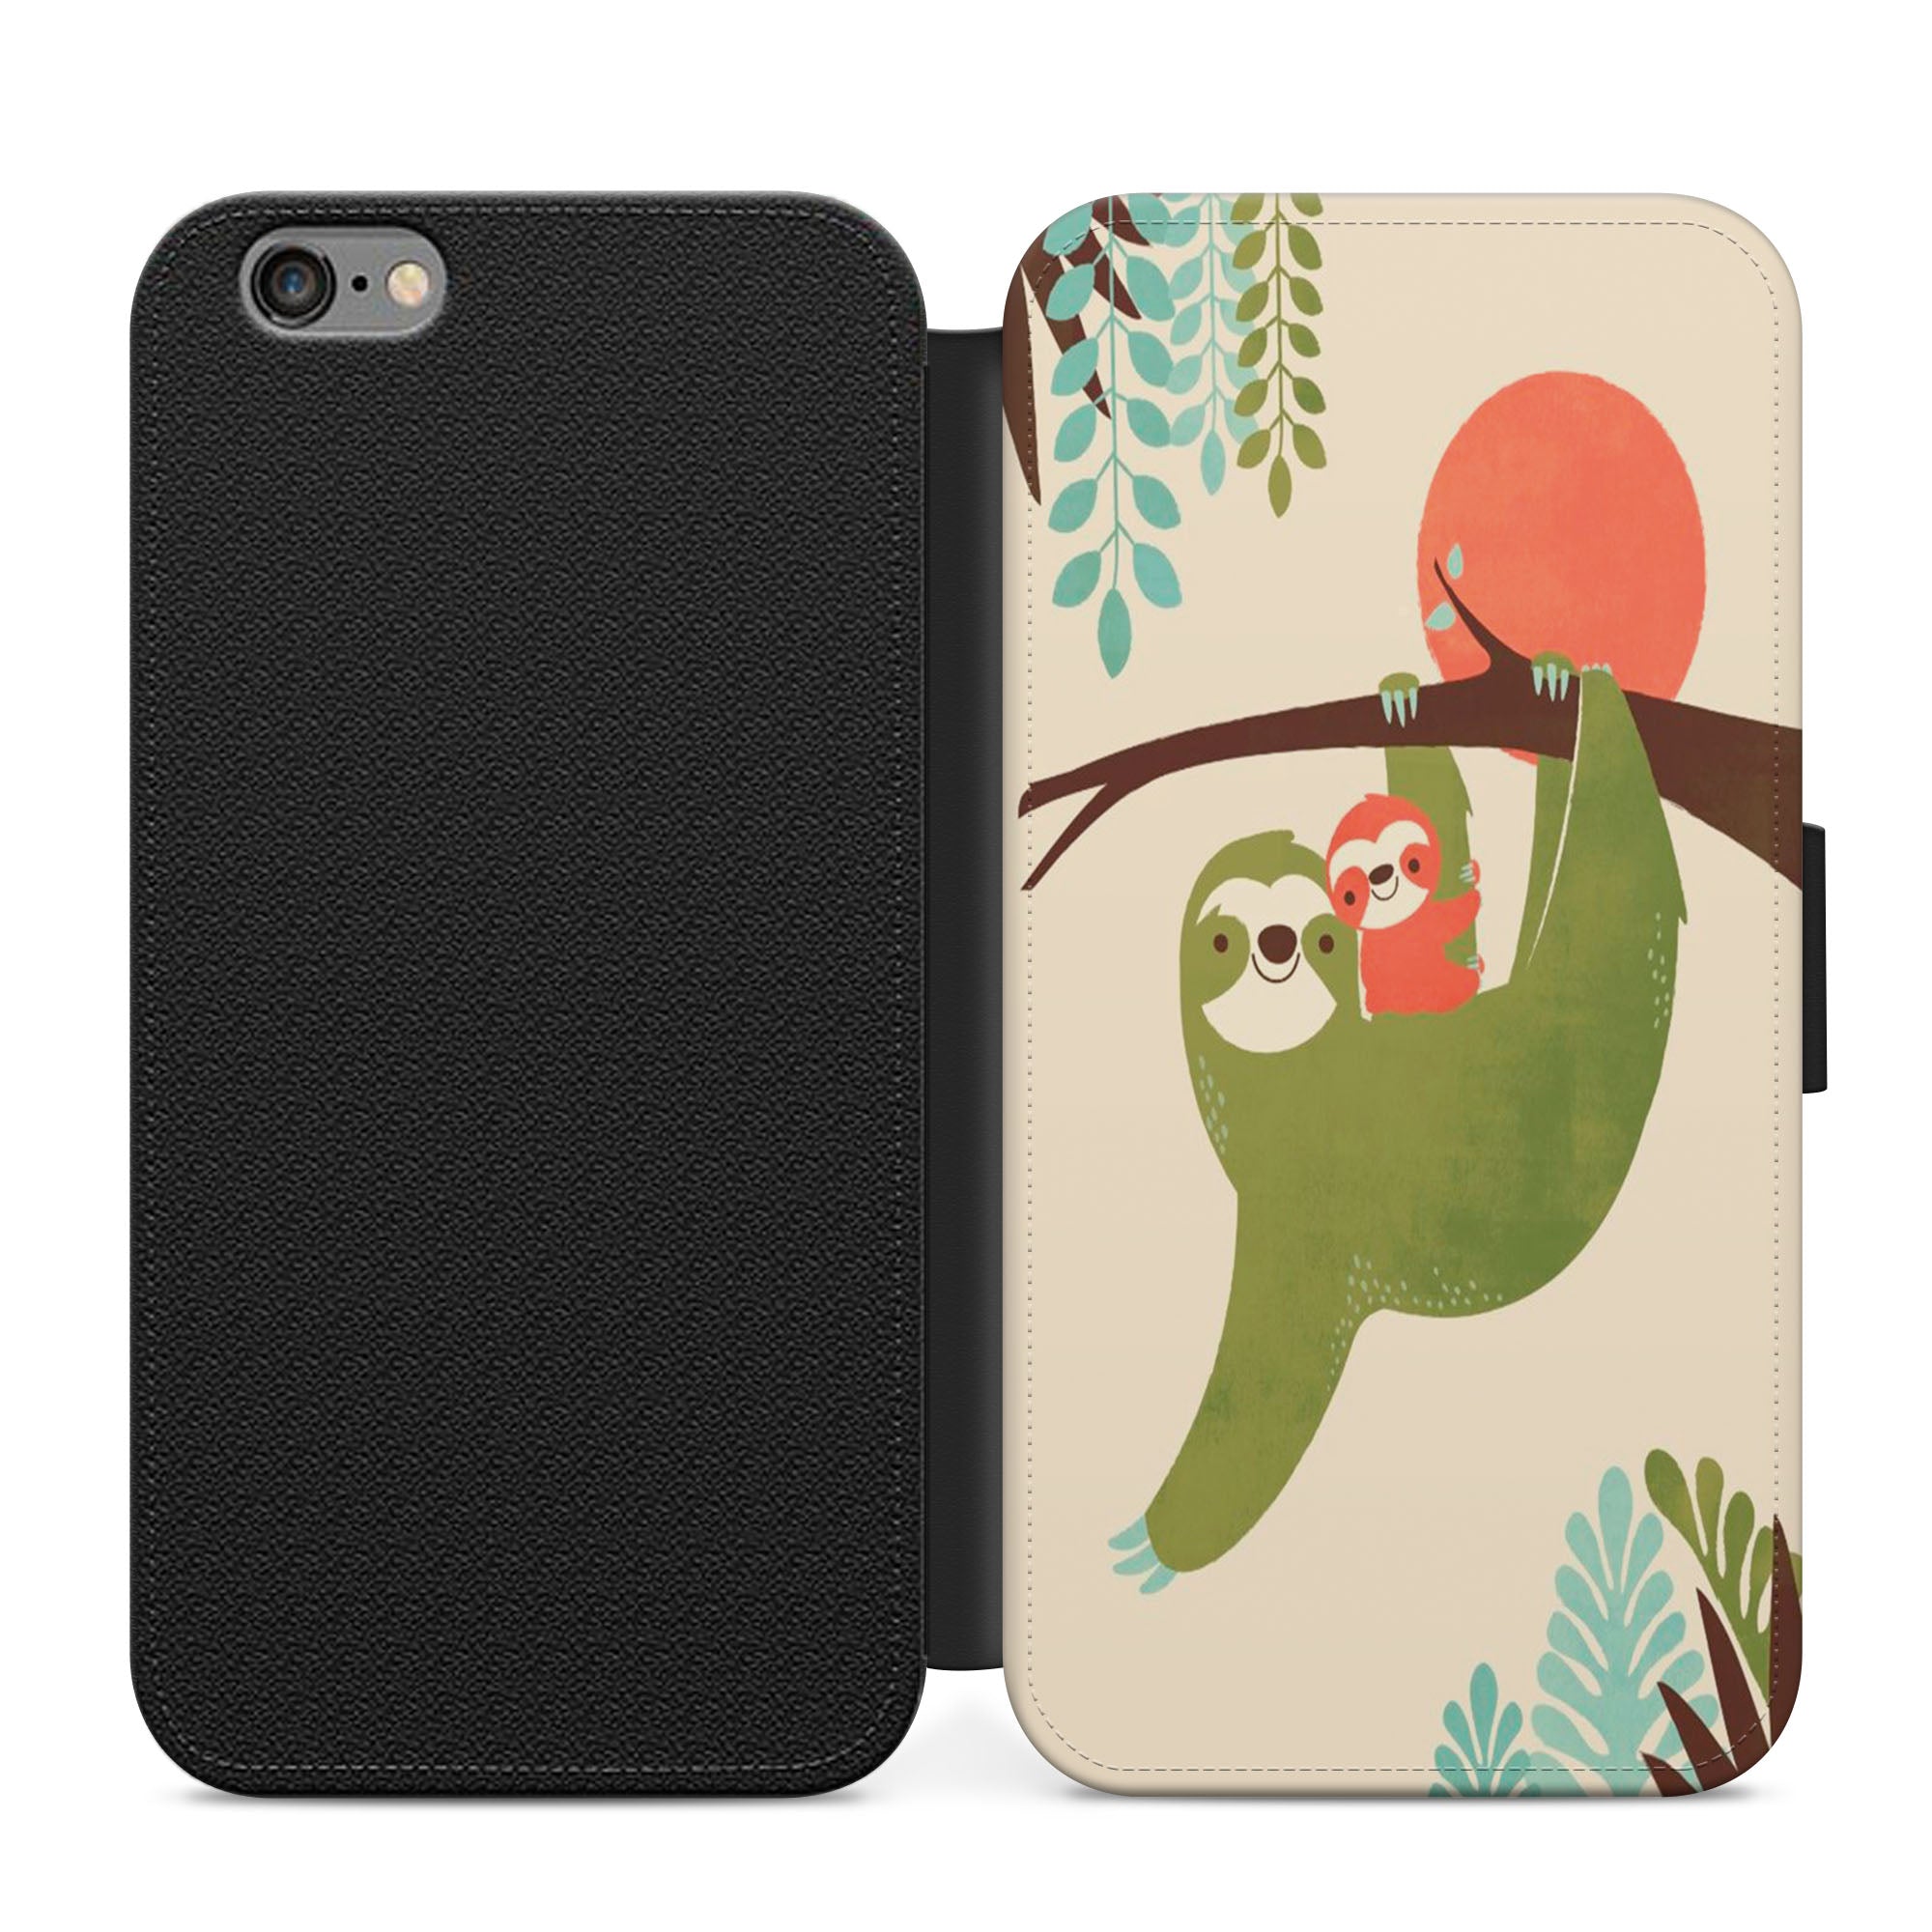 Cute Sloth Faux Leather Flip Case Wallet for iPhone / Samsung